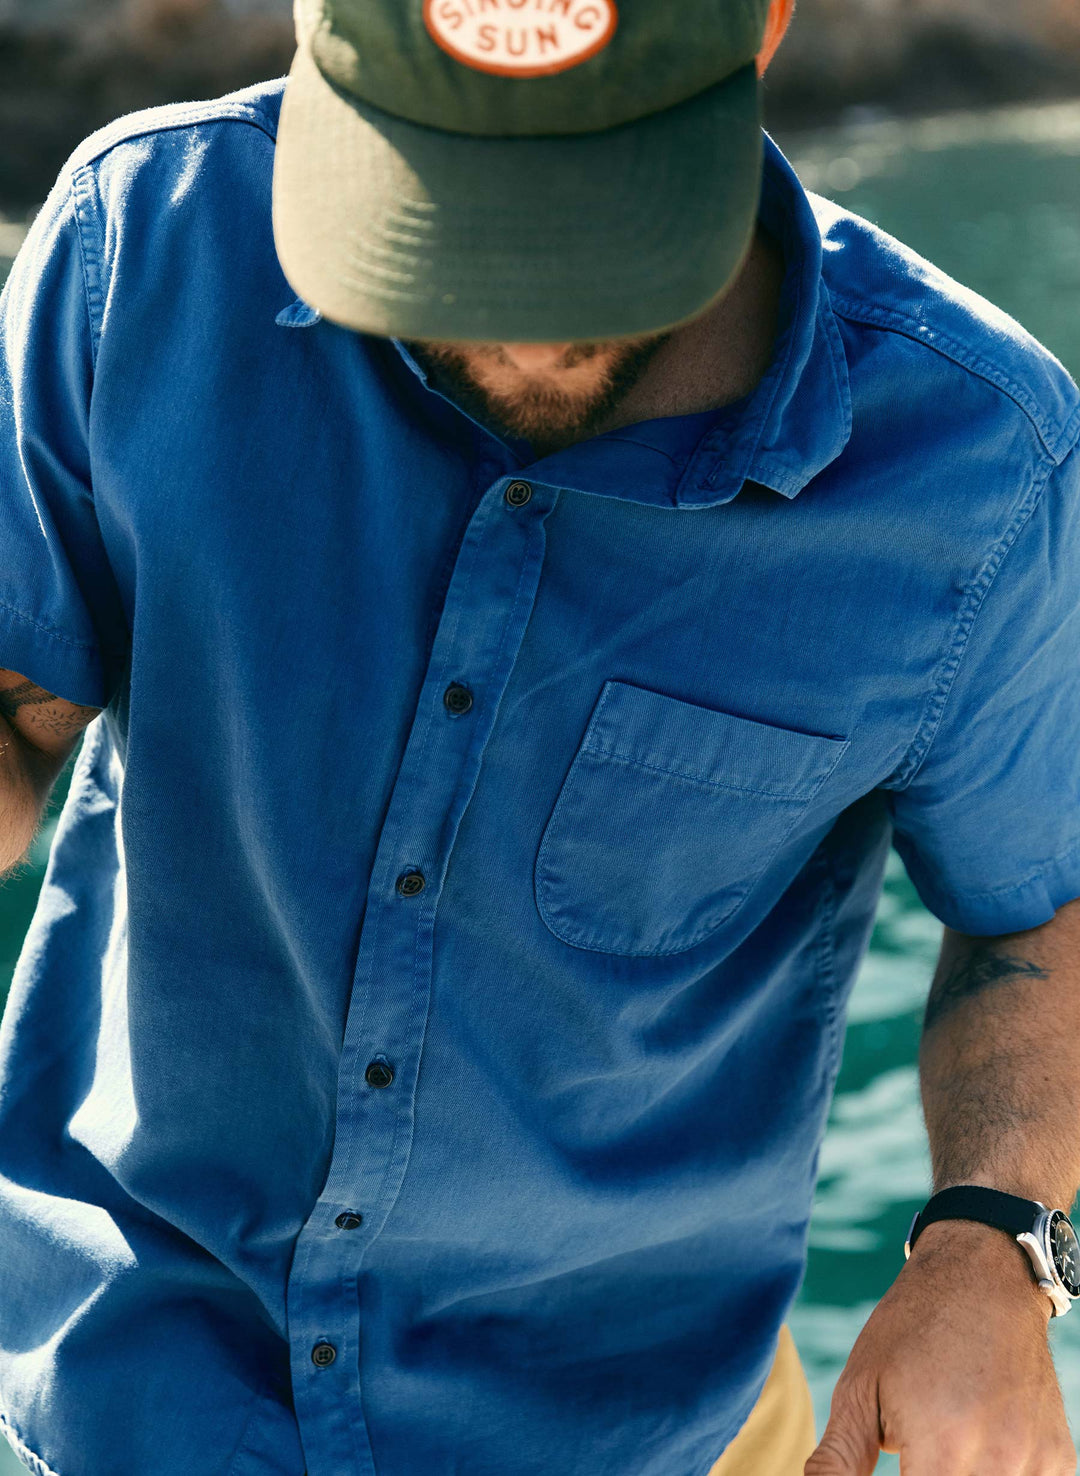 a man wearing a hat and blue shirt